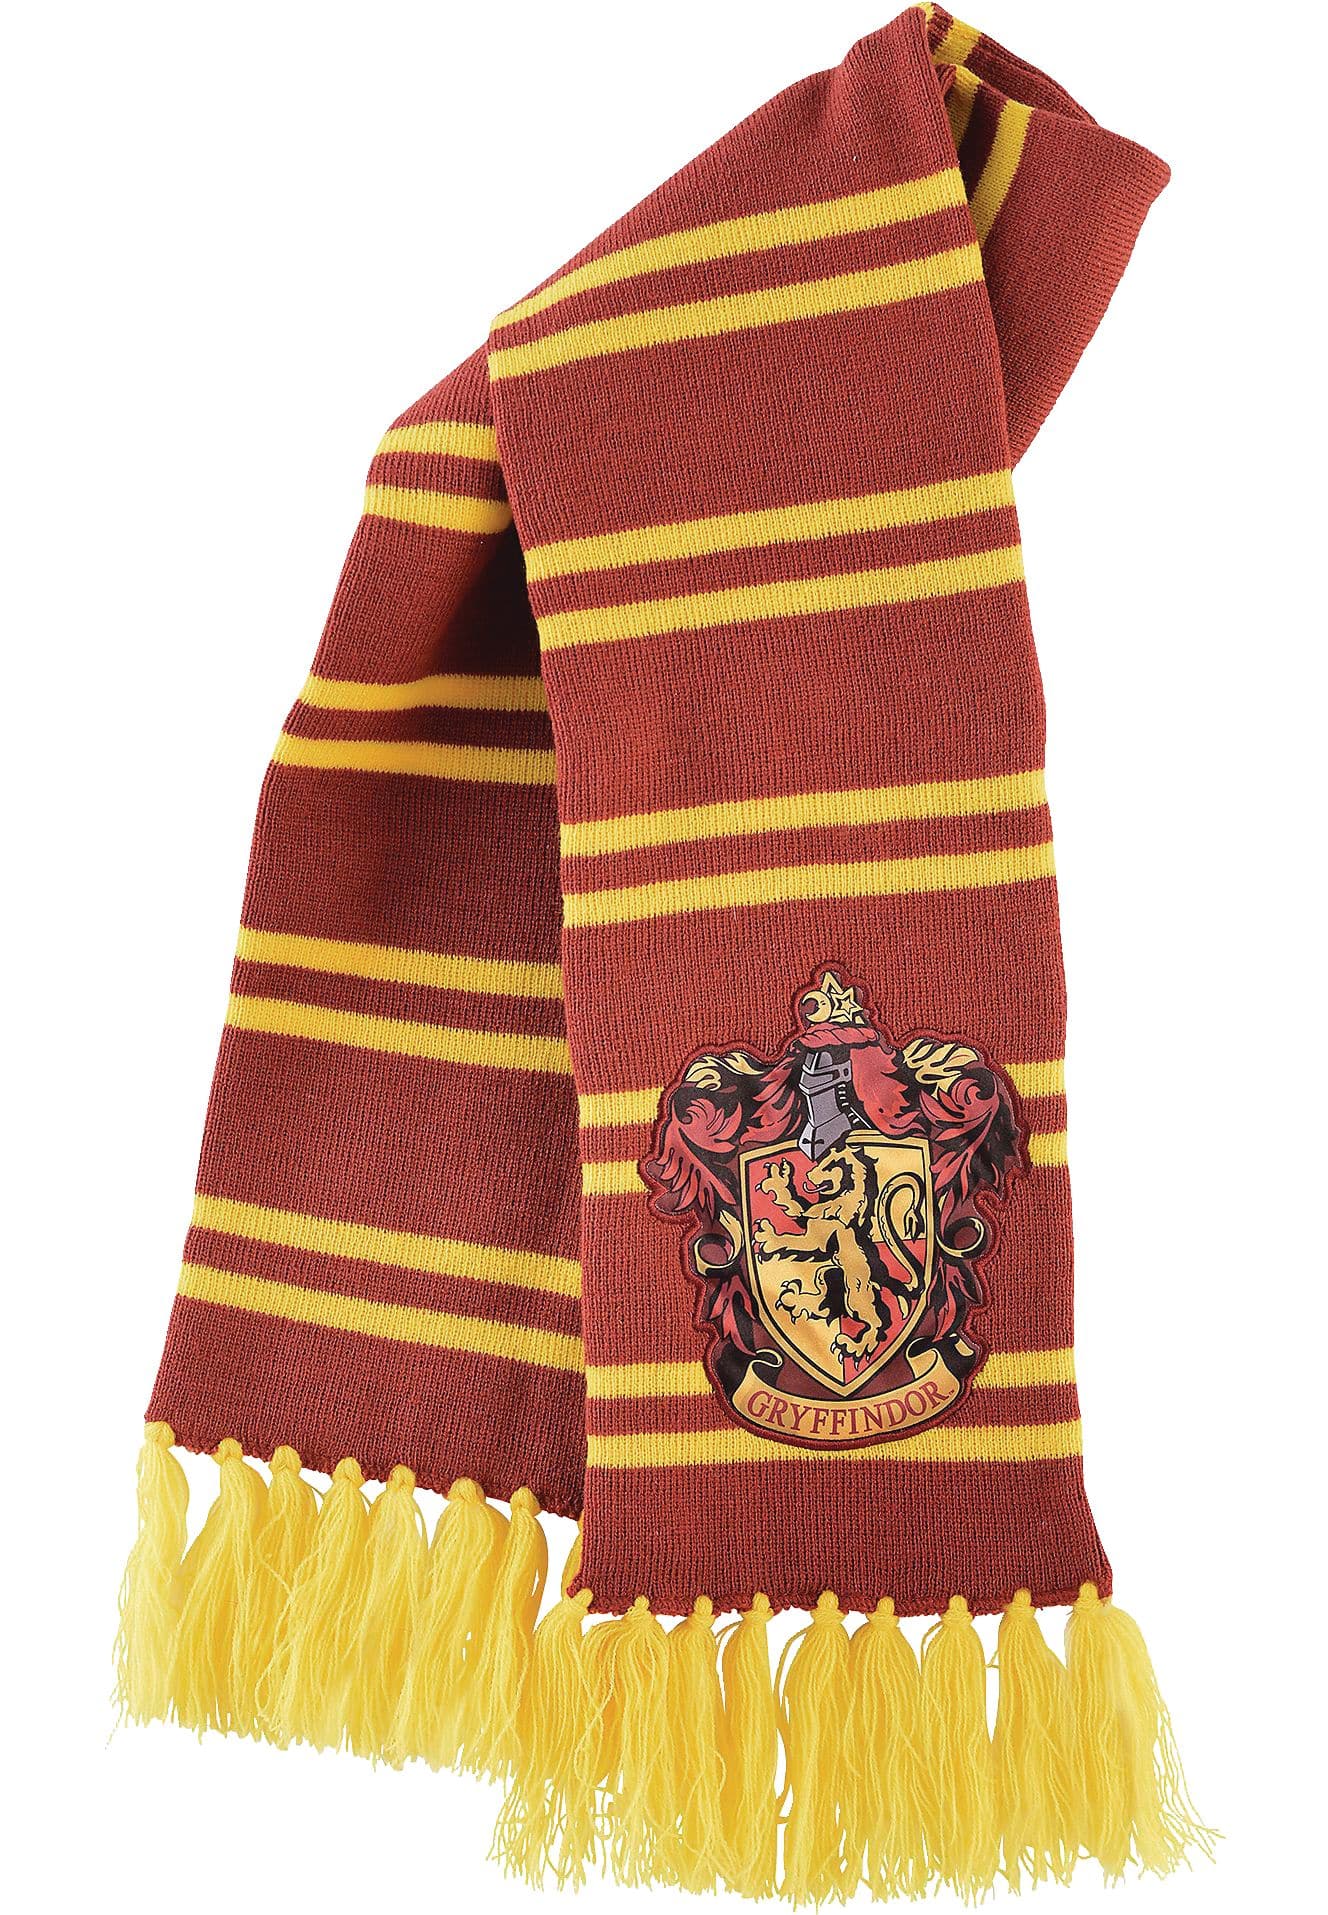 https://media-www.canadiantire.ca/product/seasonal-gardening/party-city-seasonal/party-city-halloween-and-fall-decor/8510061/pc-harry-potter-gryffindor-scarf-a07142a8-cc12-4f3a-b026-5502901ac715-jpgrendition.jpg